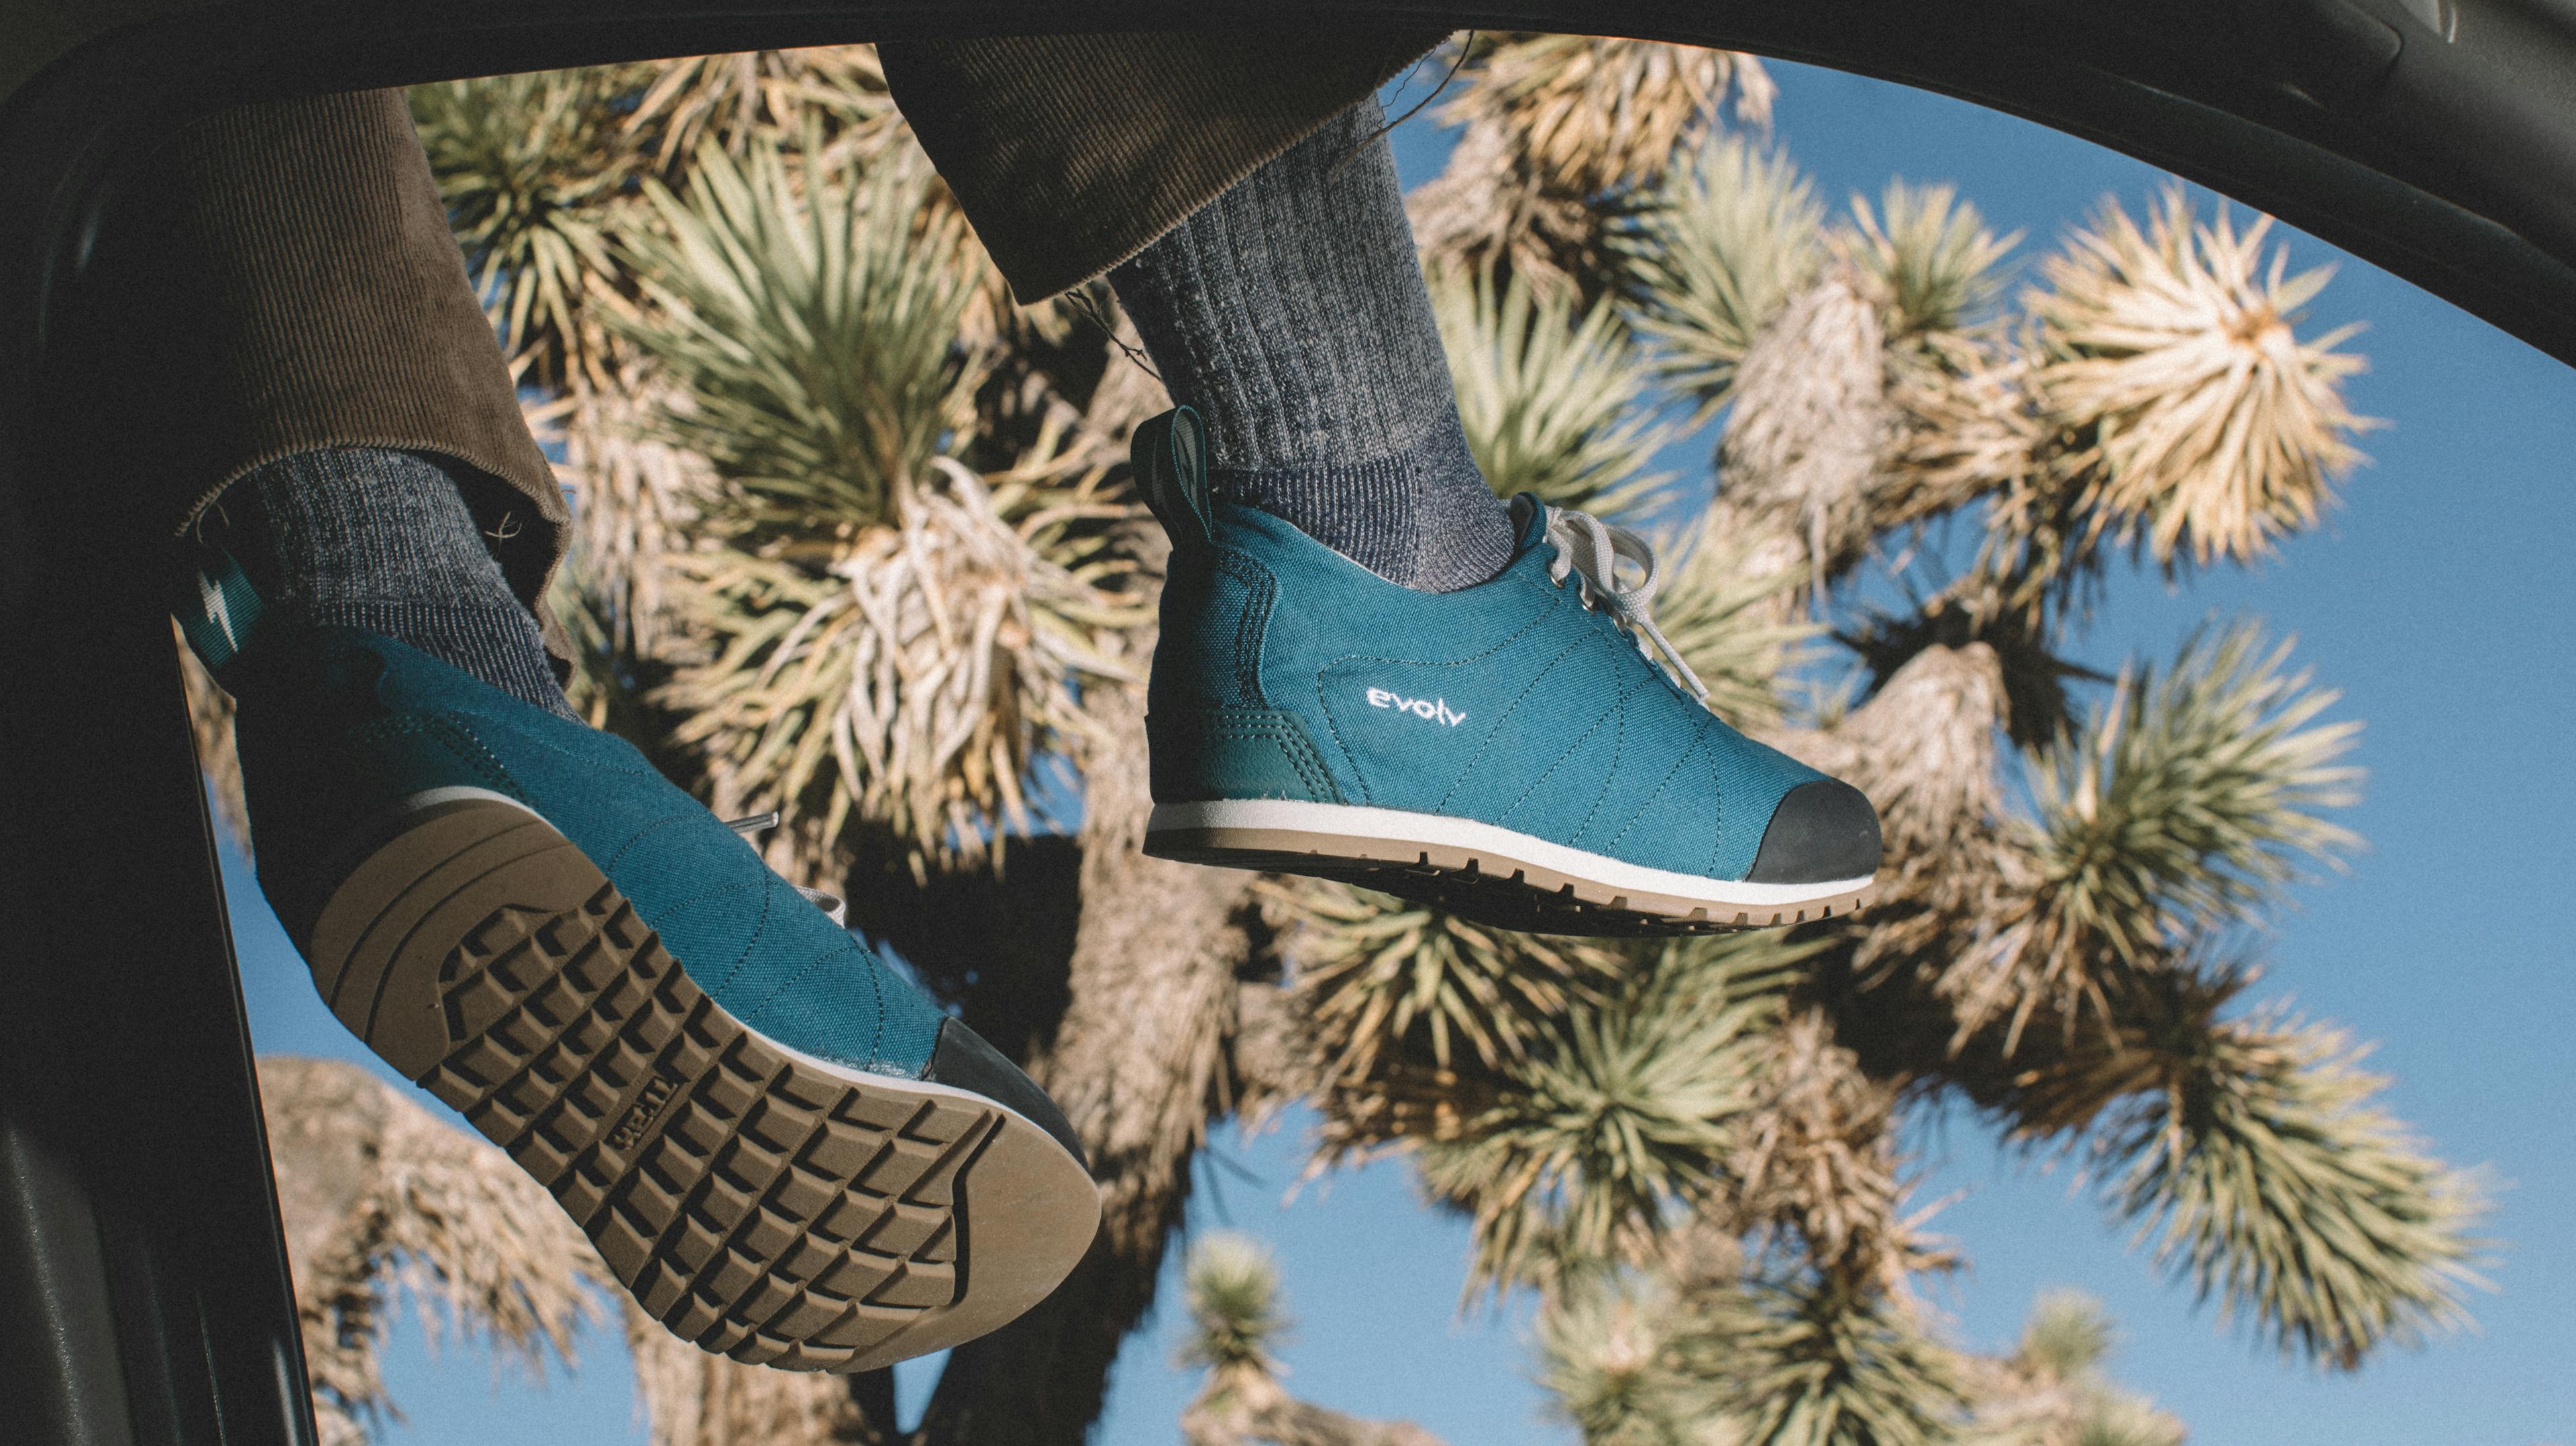 A pair of Evolv shoes shot overtop an environment in Southern California.